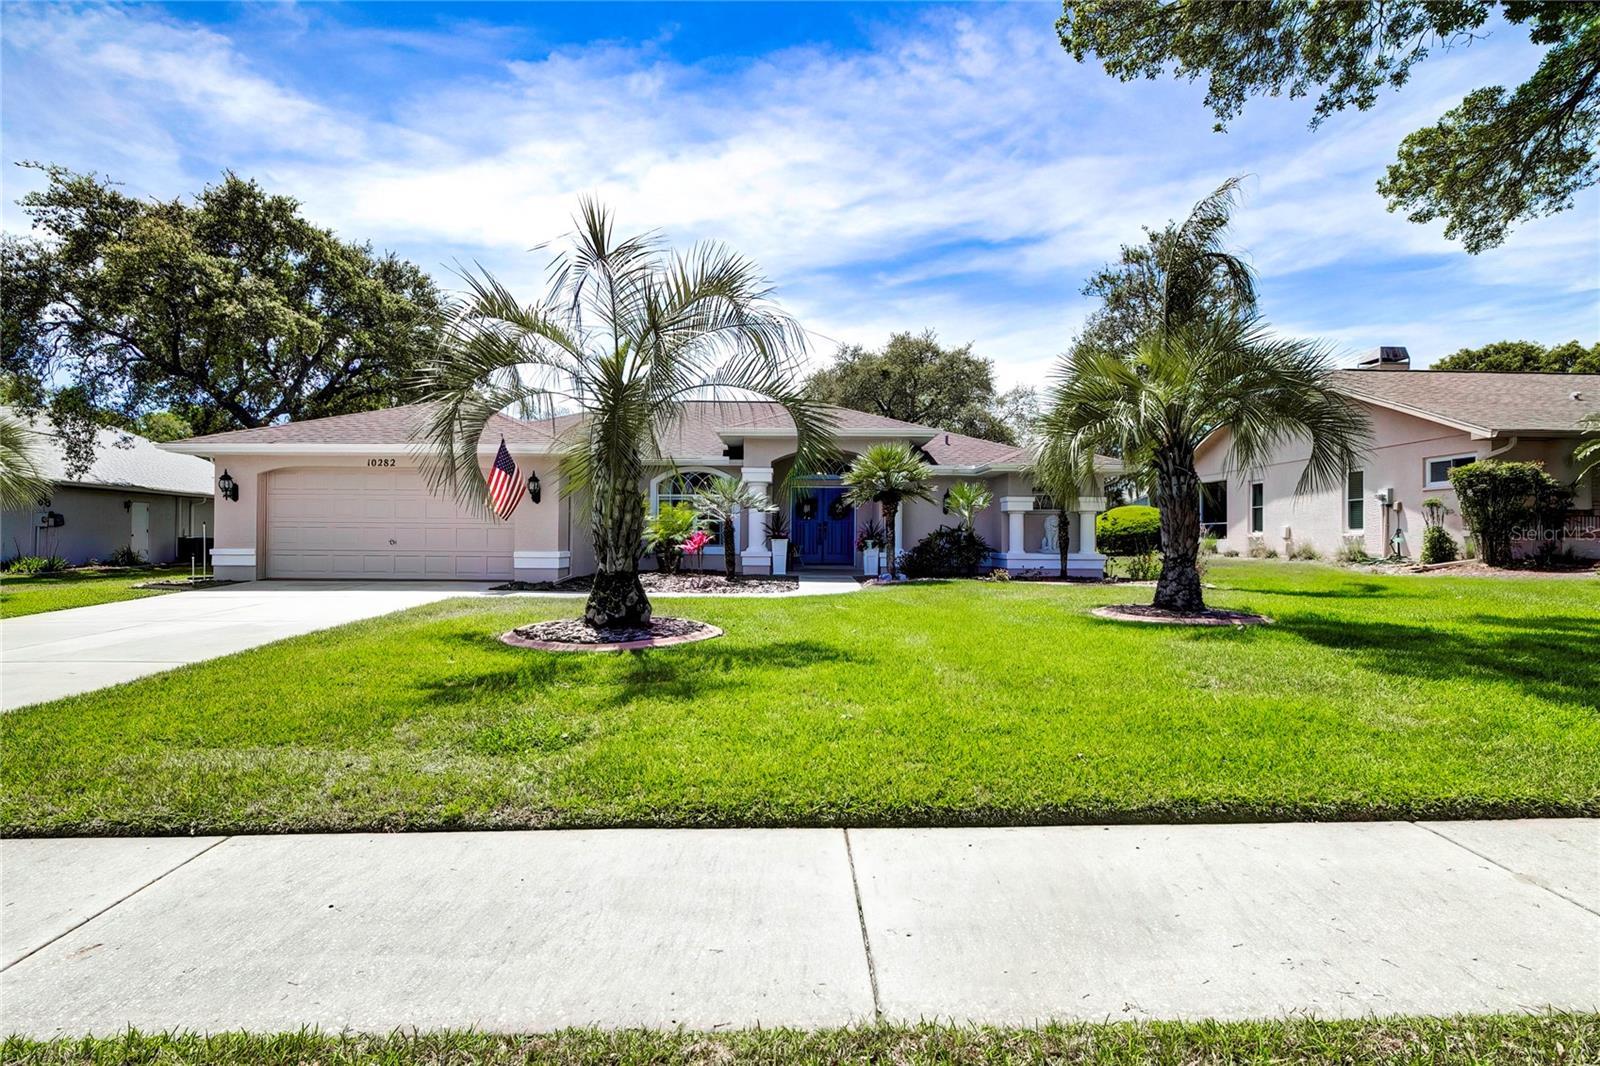 Photo one of 10282 Windsor Ct Spring Hill FL 34608 | MLS W7863720